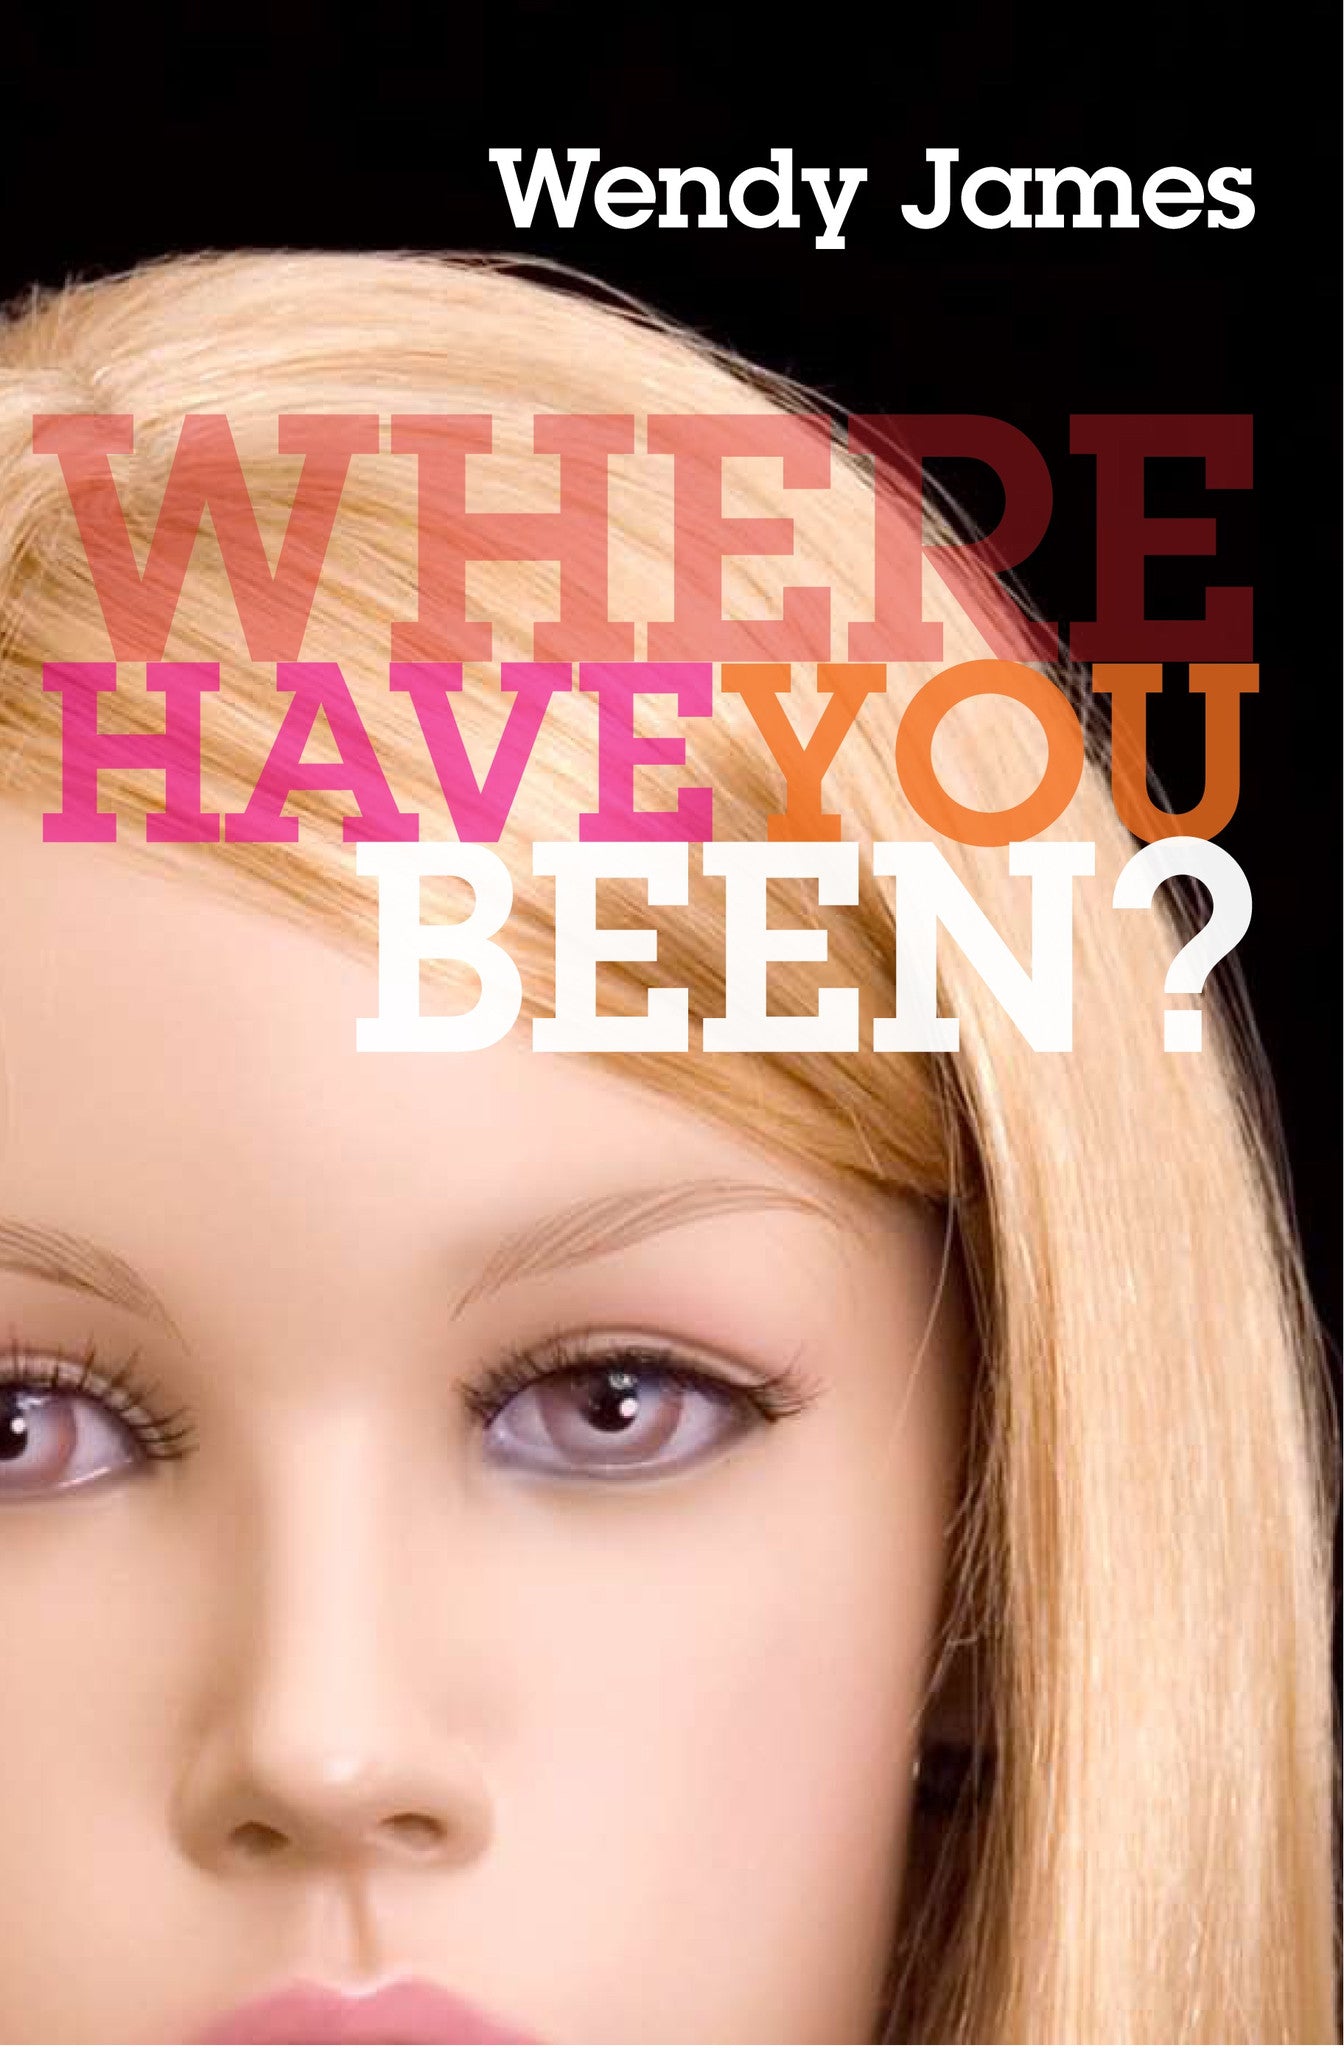 Where Have You Been?